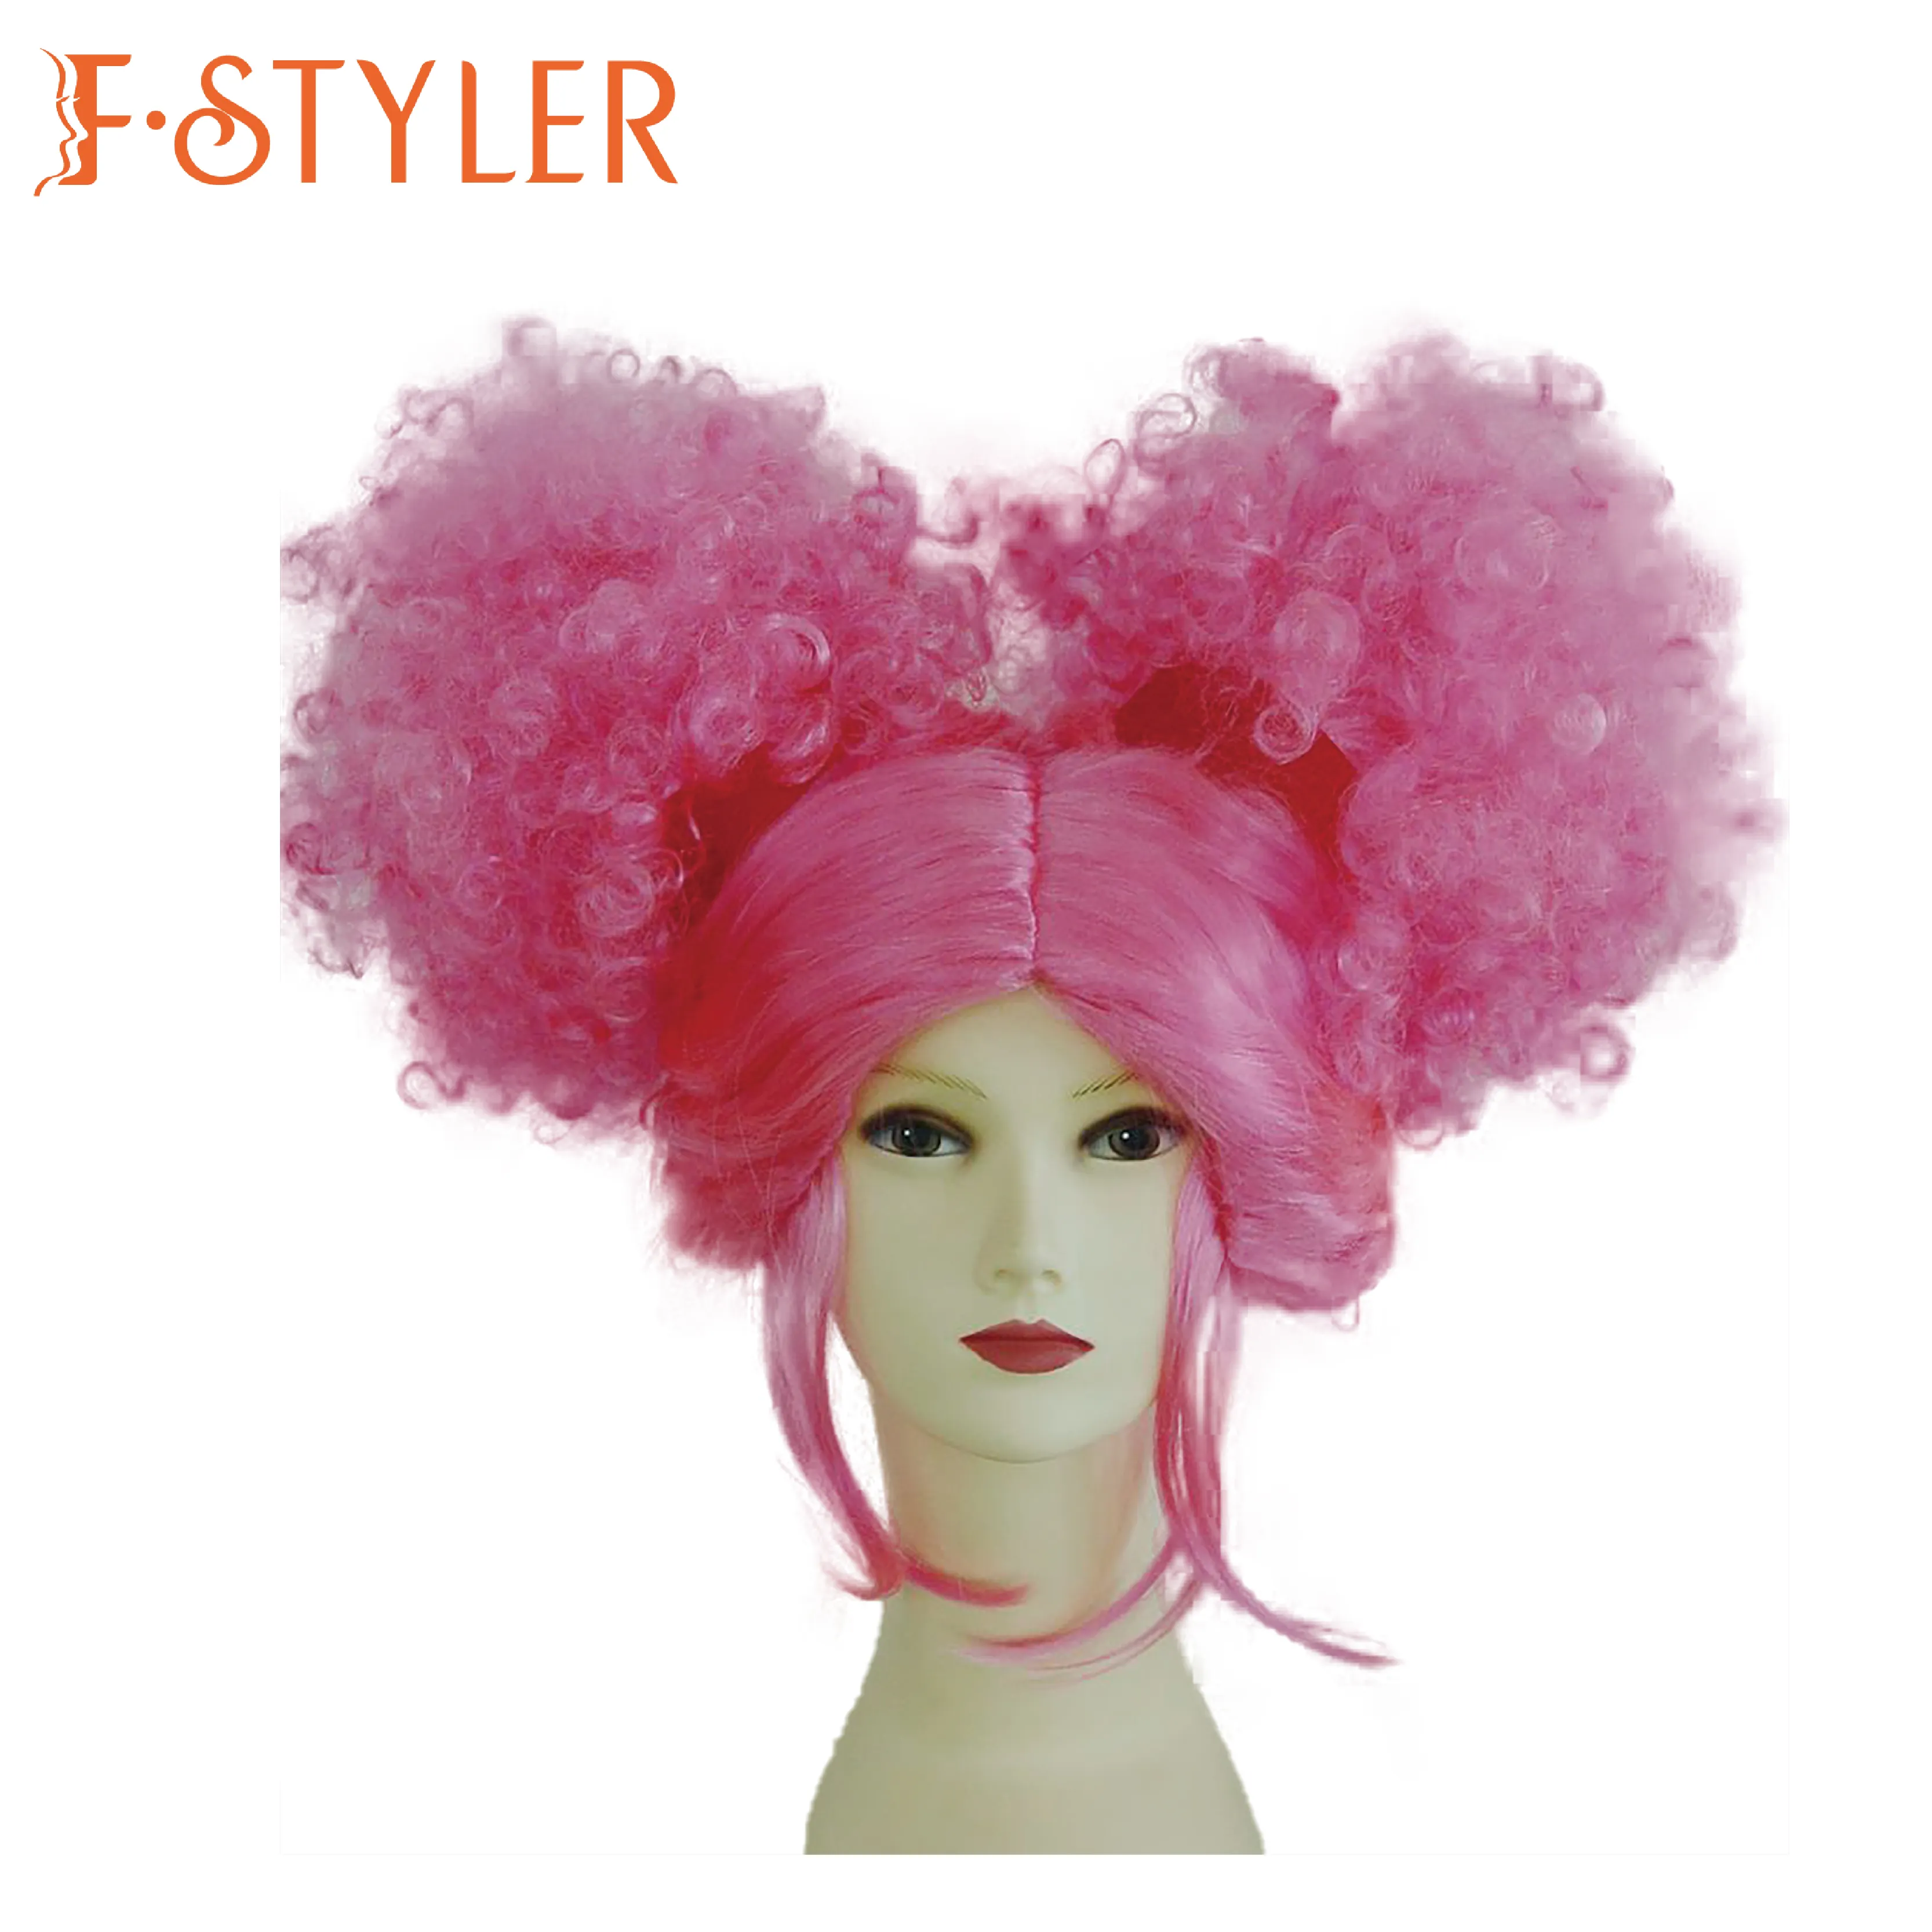 FSTYLER grand style cheveux Halloween carnaval perruques Offre Spéciale vente en gros usine personnaliser mode fête synthétique cosplay perruques